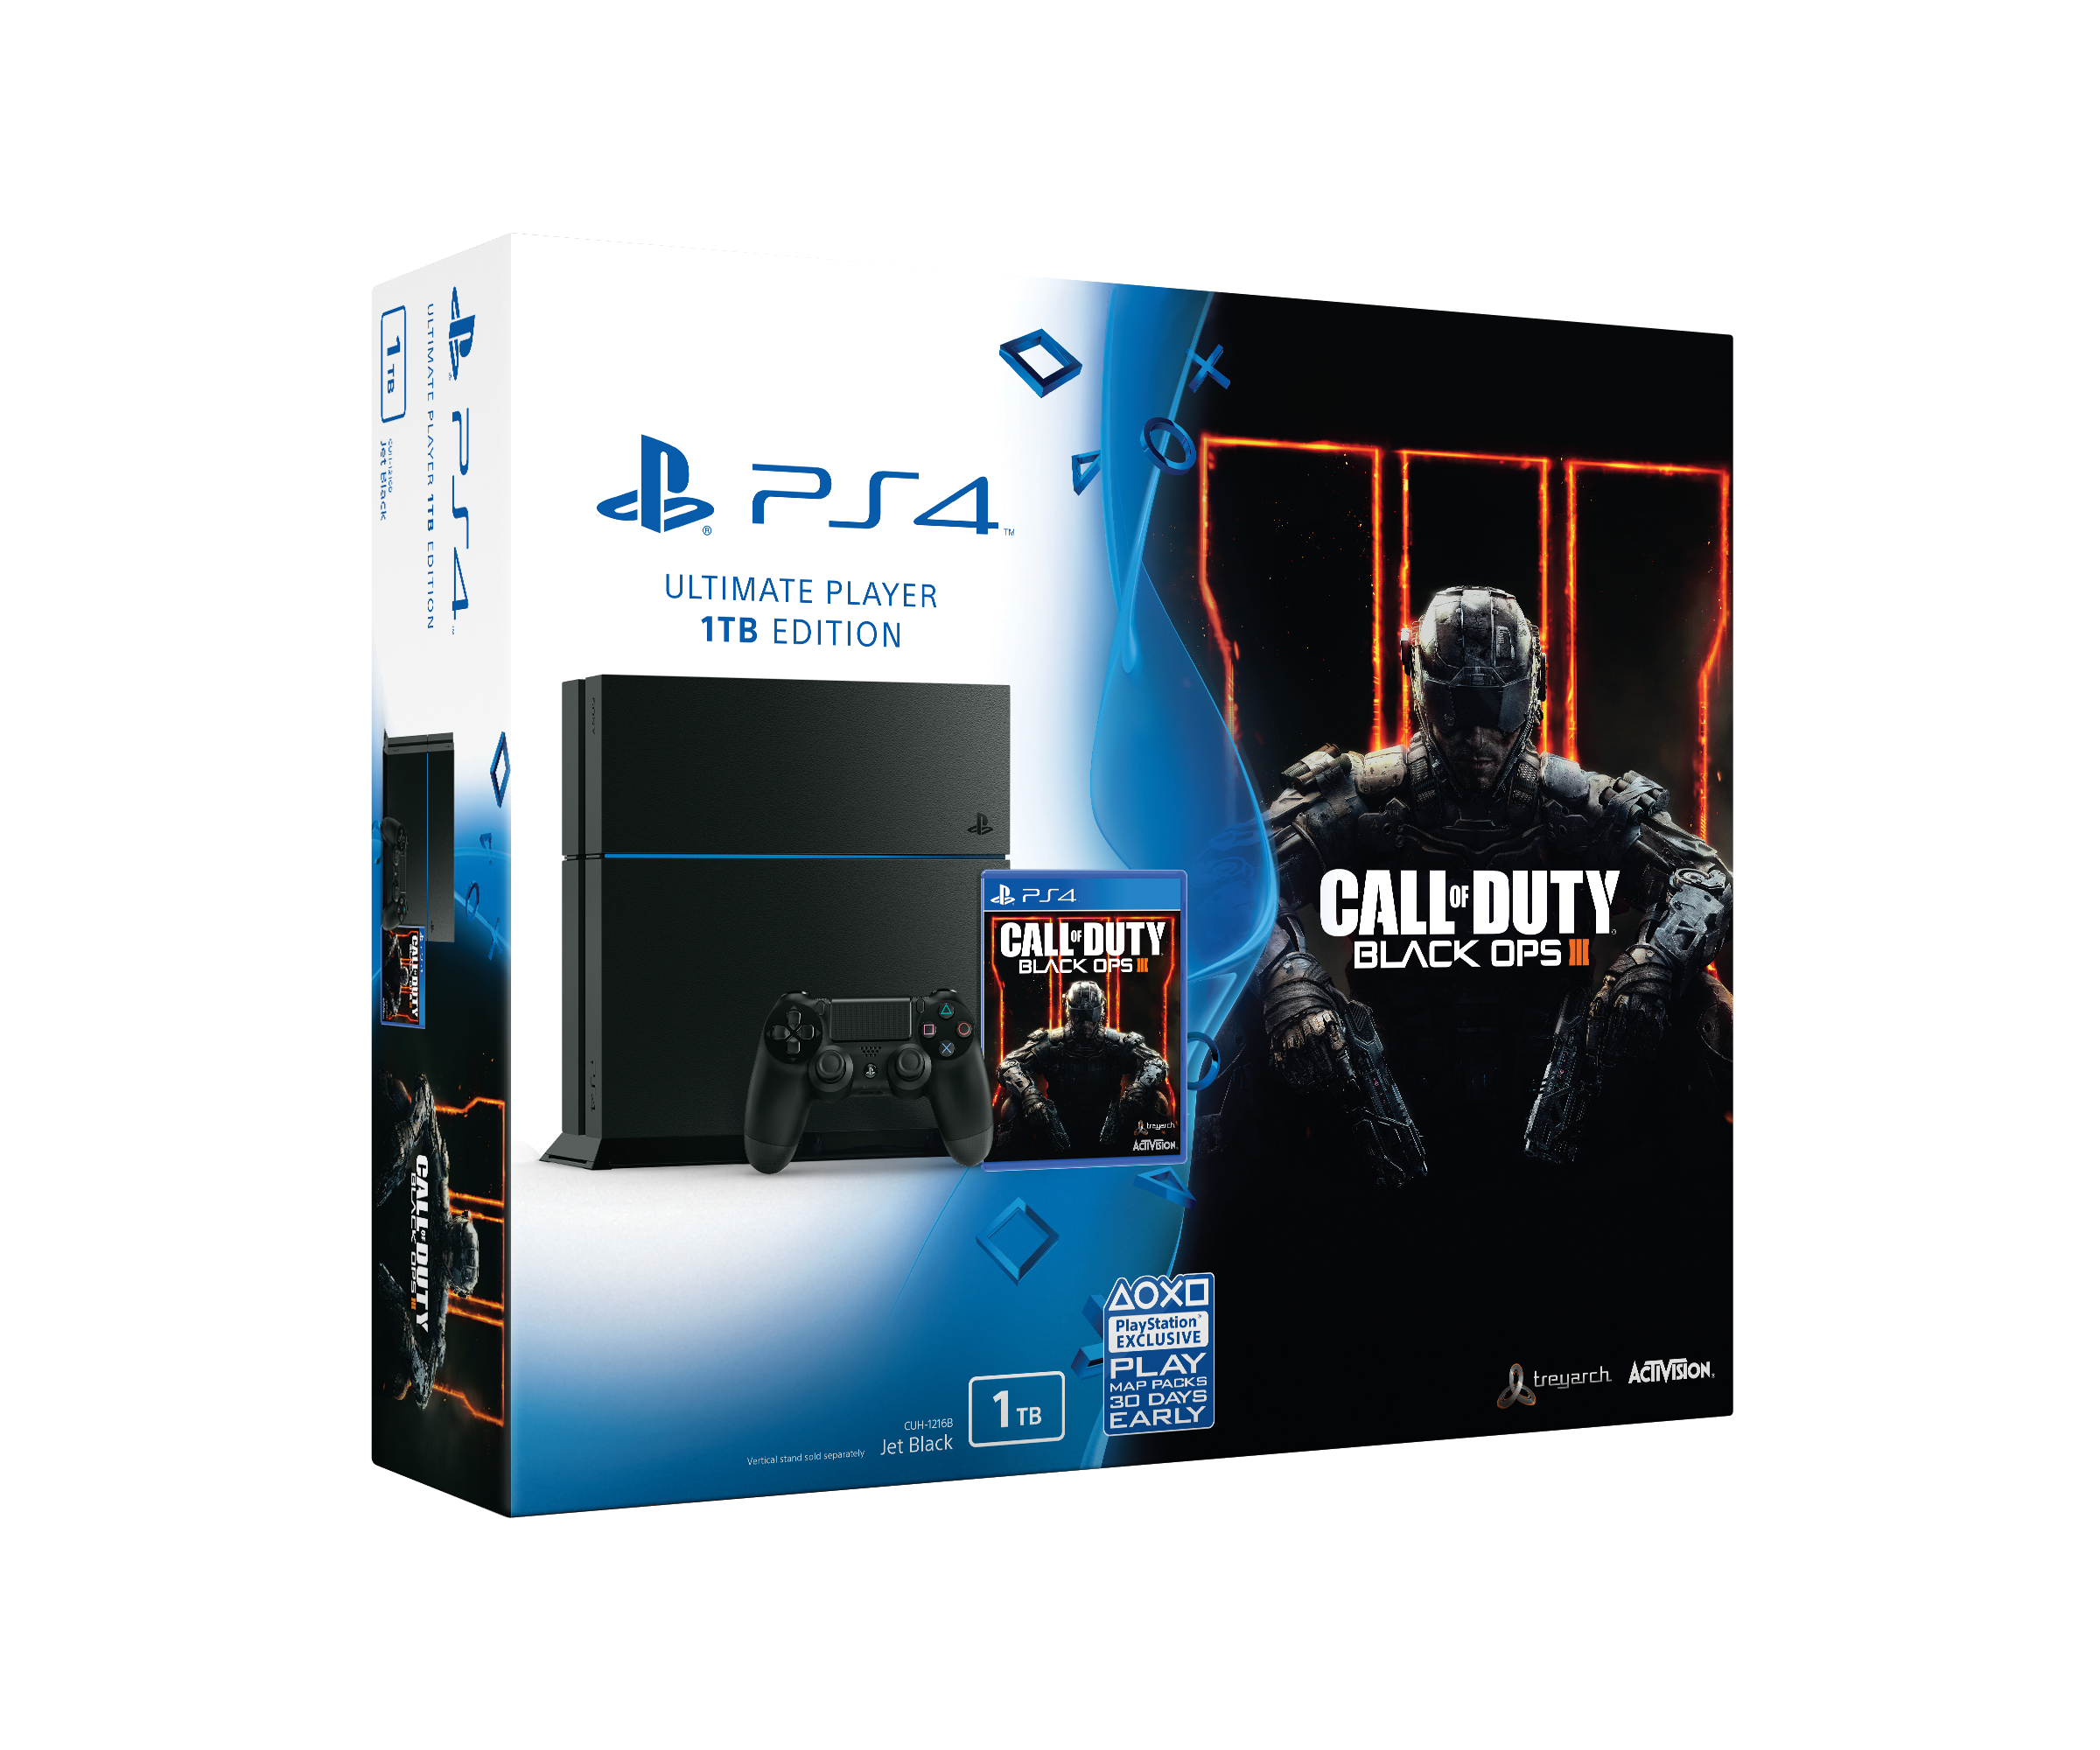 Køb 4 Console - Player 1TB - Call of Duty: Black Ops III (3) Bundle